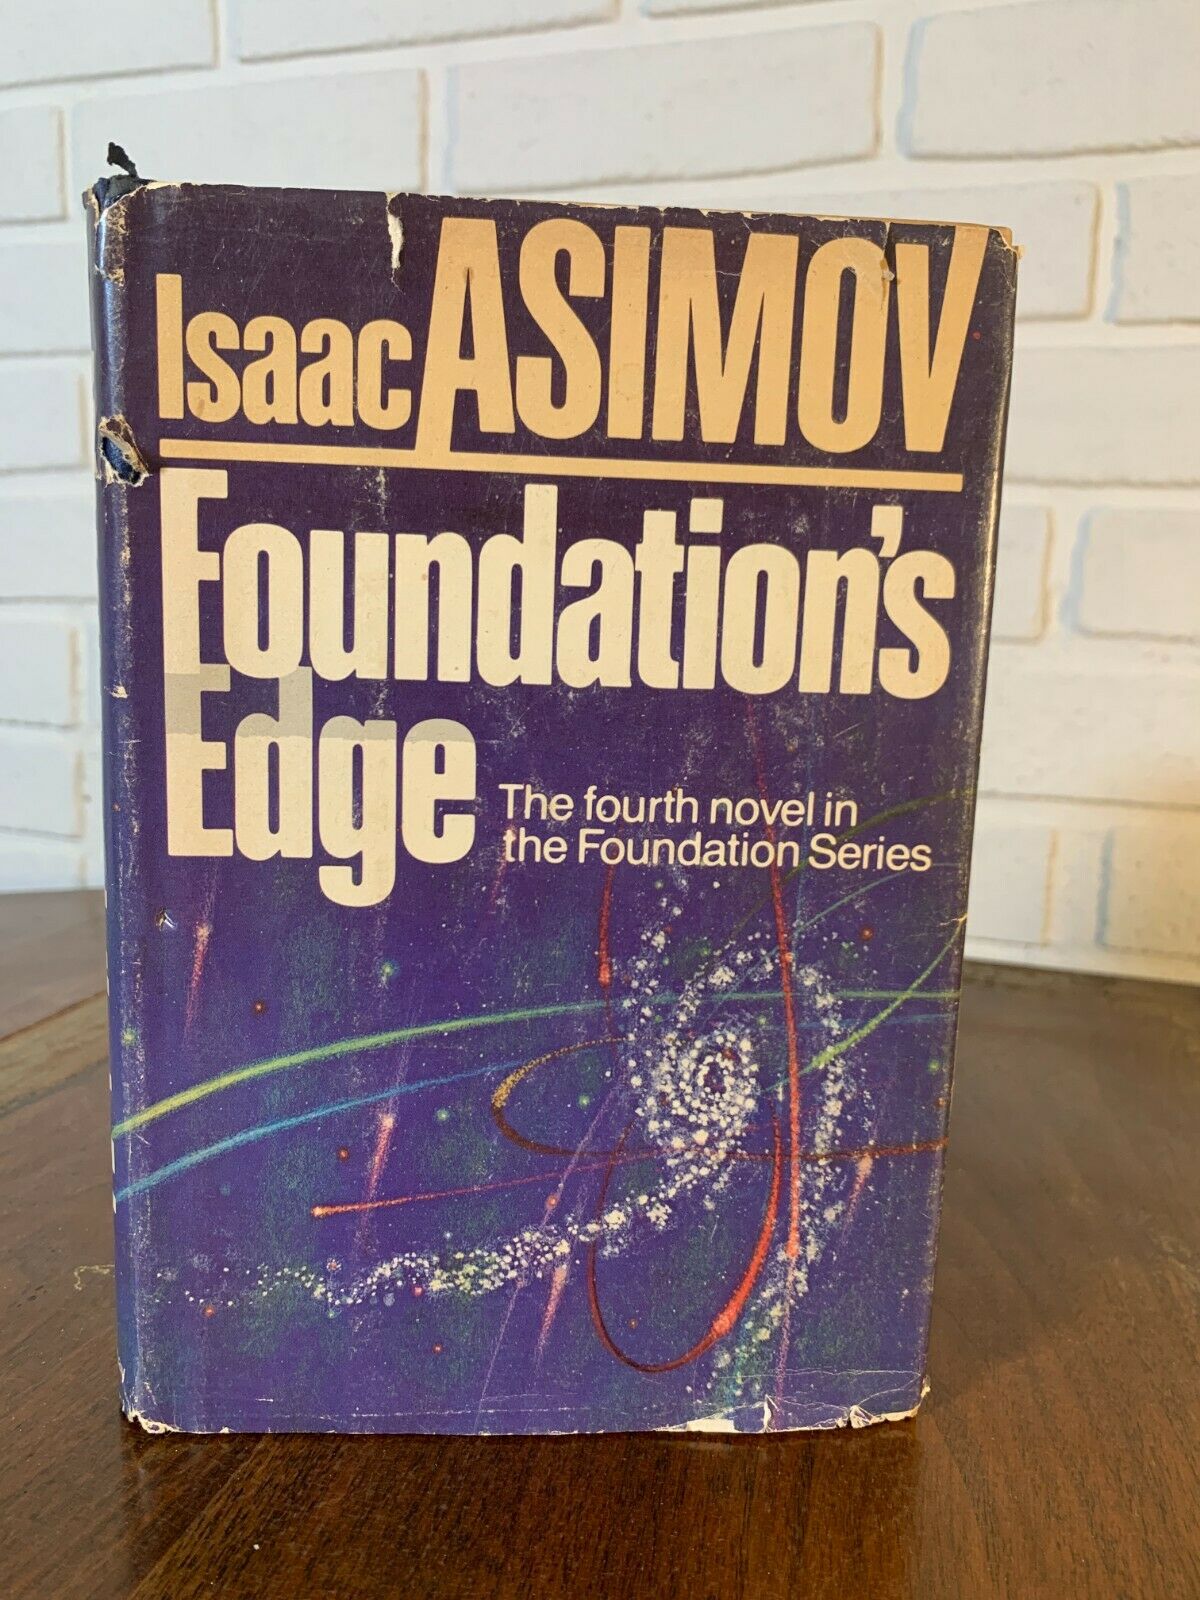 Foundation's Edge by Isaac Asimov (1982, Hardcover) First Edition Sci Fi (C10)